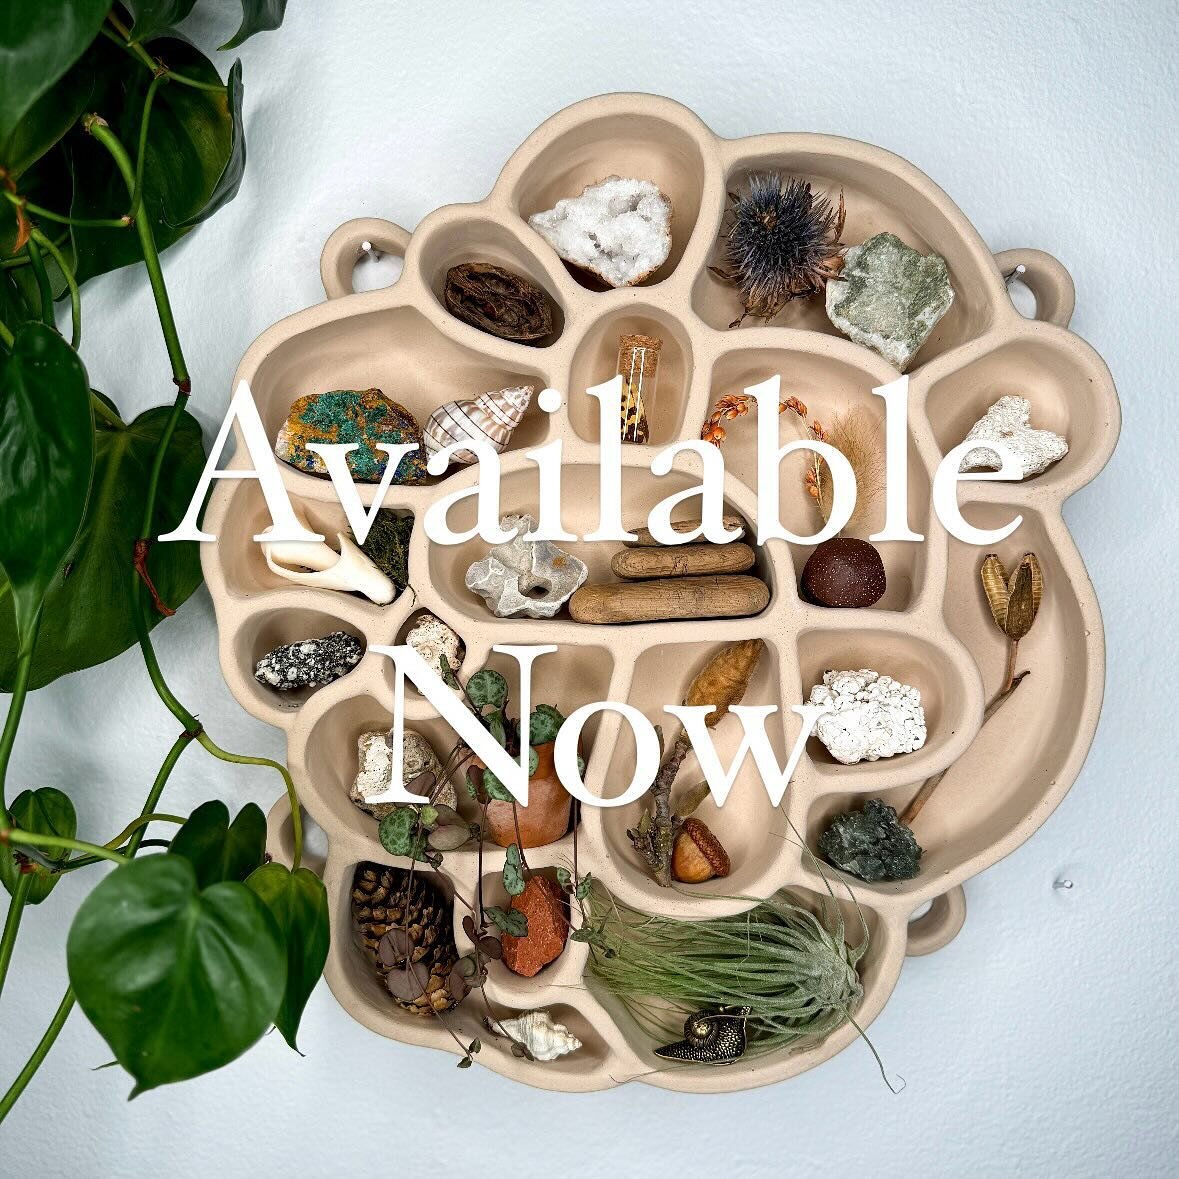 Sand has been added to the website (link in bio) along with a handful of ready to ship Moss and Terracotta shelves ✨

#curioshelf #natureshelf #naturalhomedecor #naturecollection #natureshop #rockshop #rockshelf #curiosities #oddities #odditiesandcur